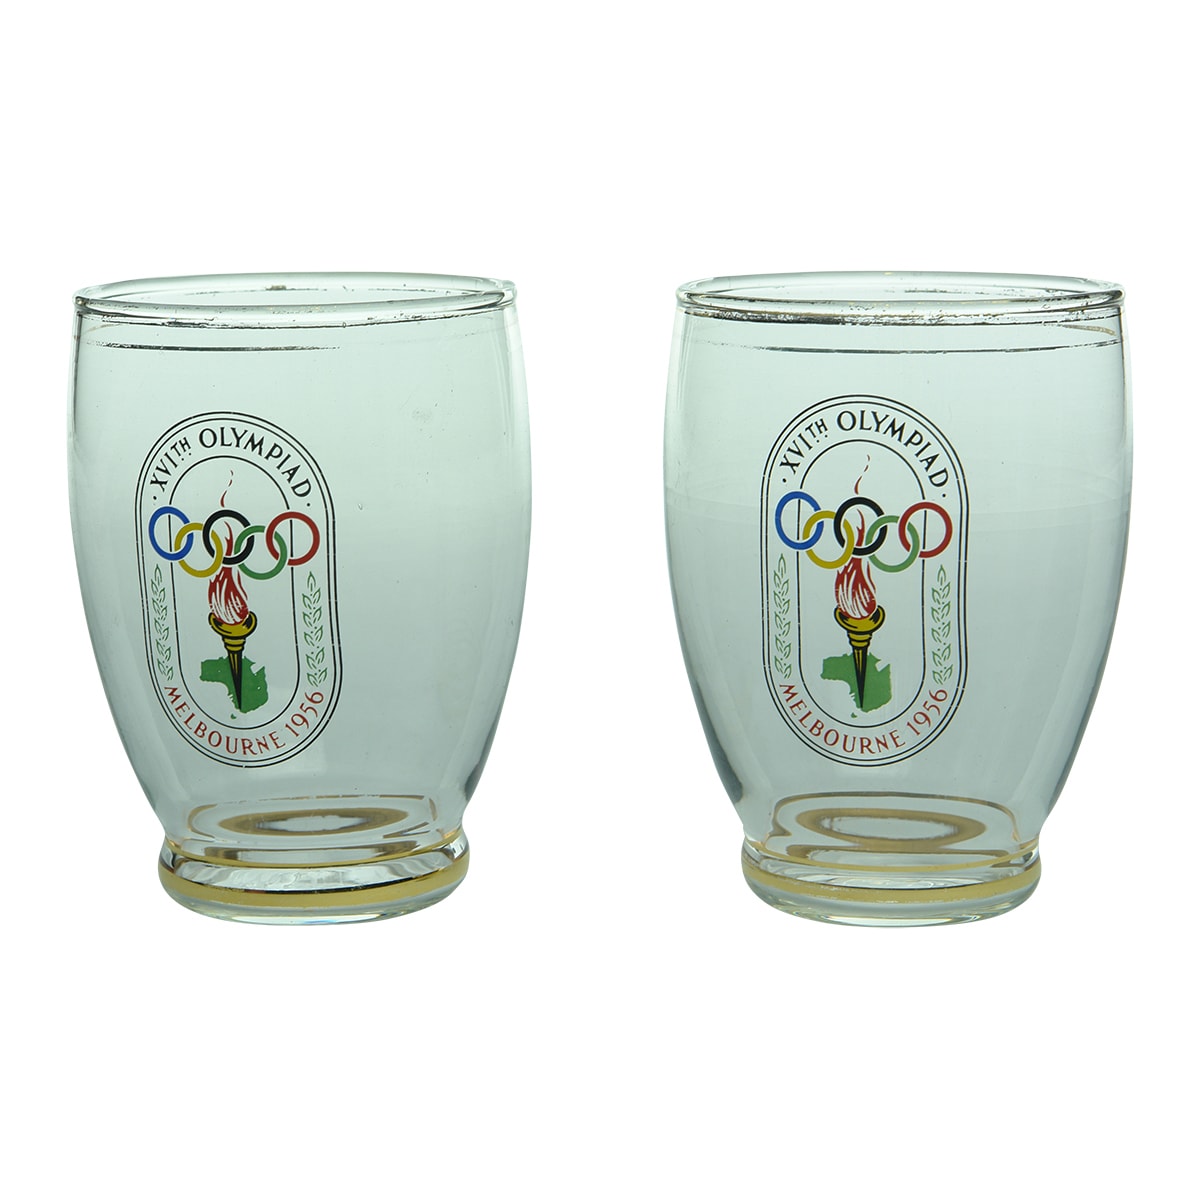 Pair of Melbourne Olympics Glasses 1956.